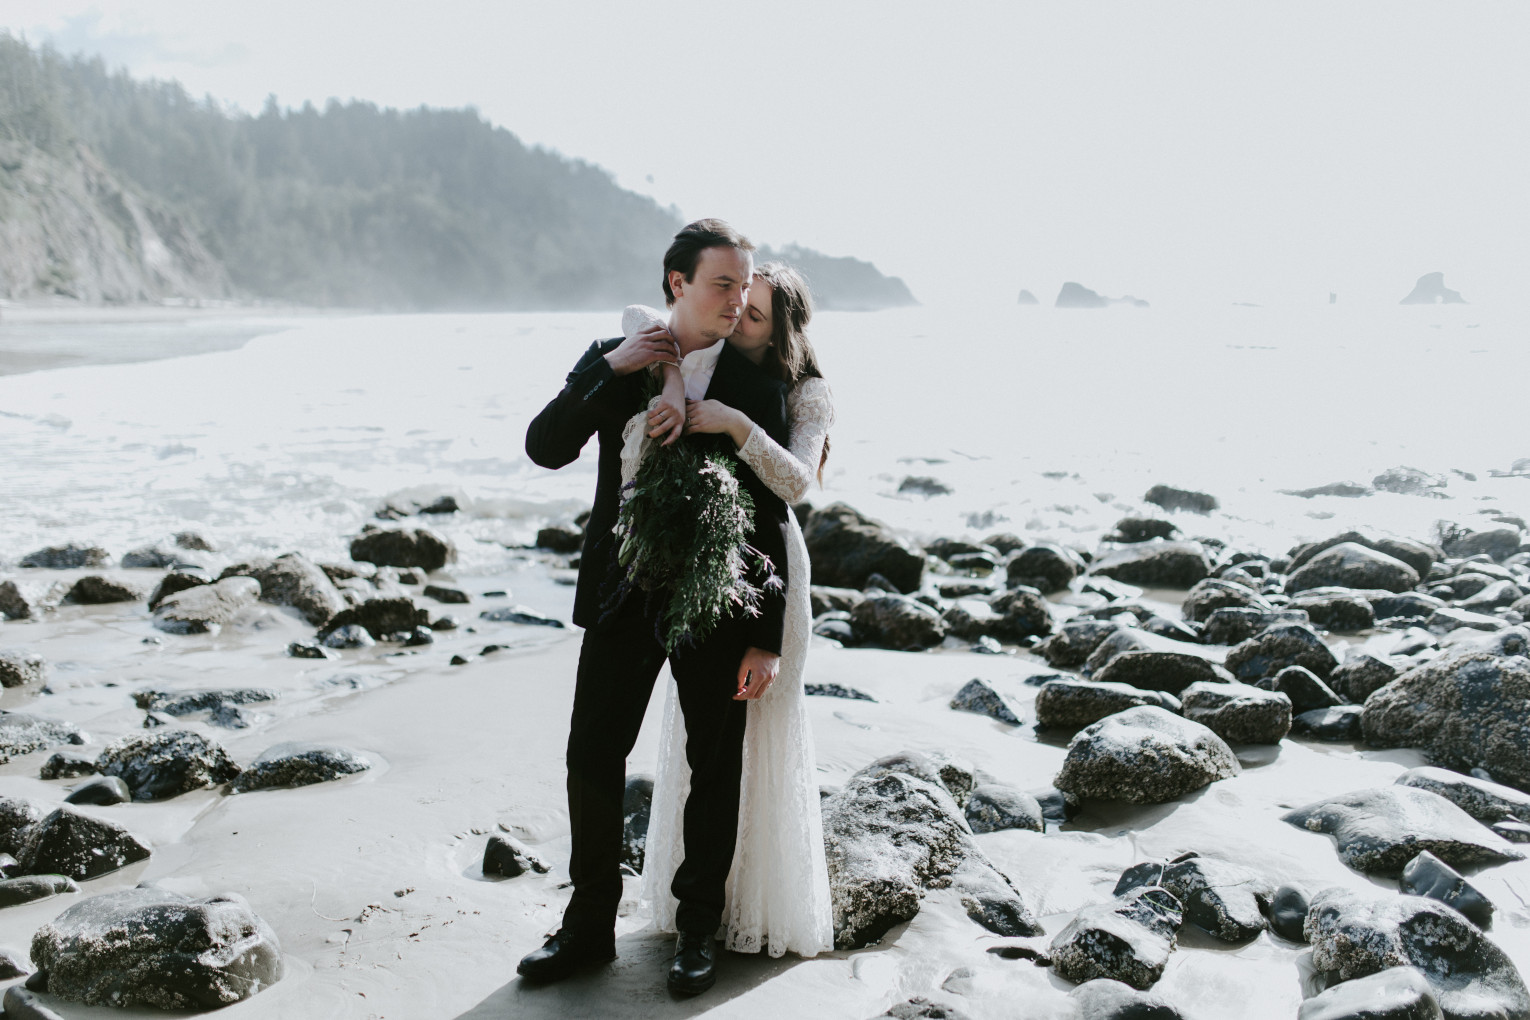 Nicole and Vlad hug near the ocean at Cannon Beach. Elopement wedding photography at Cannon Beach by Sienna Plus Josh.